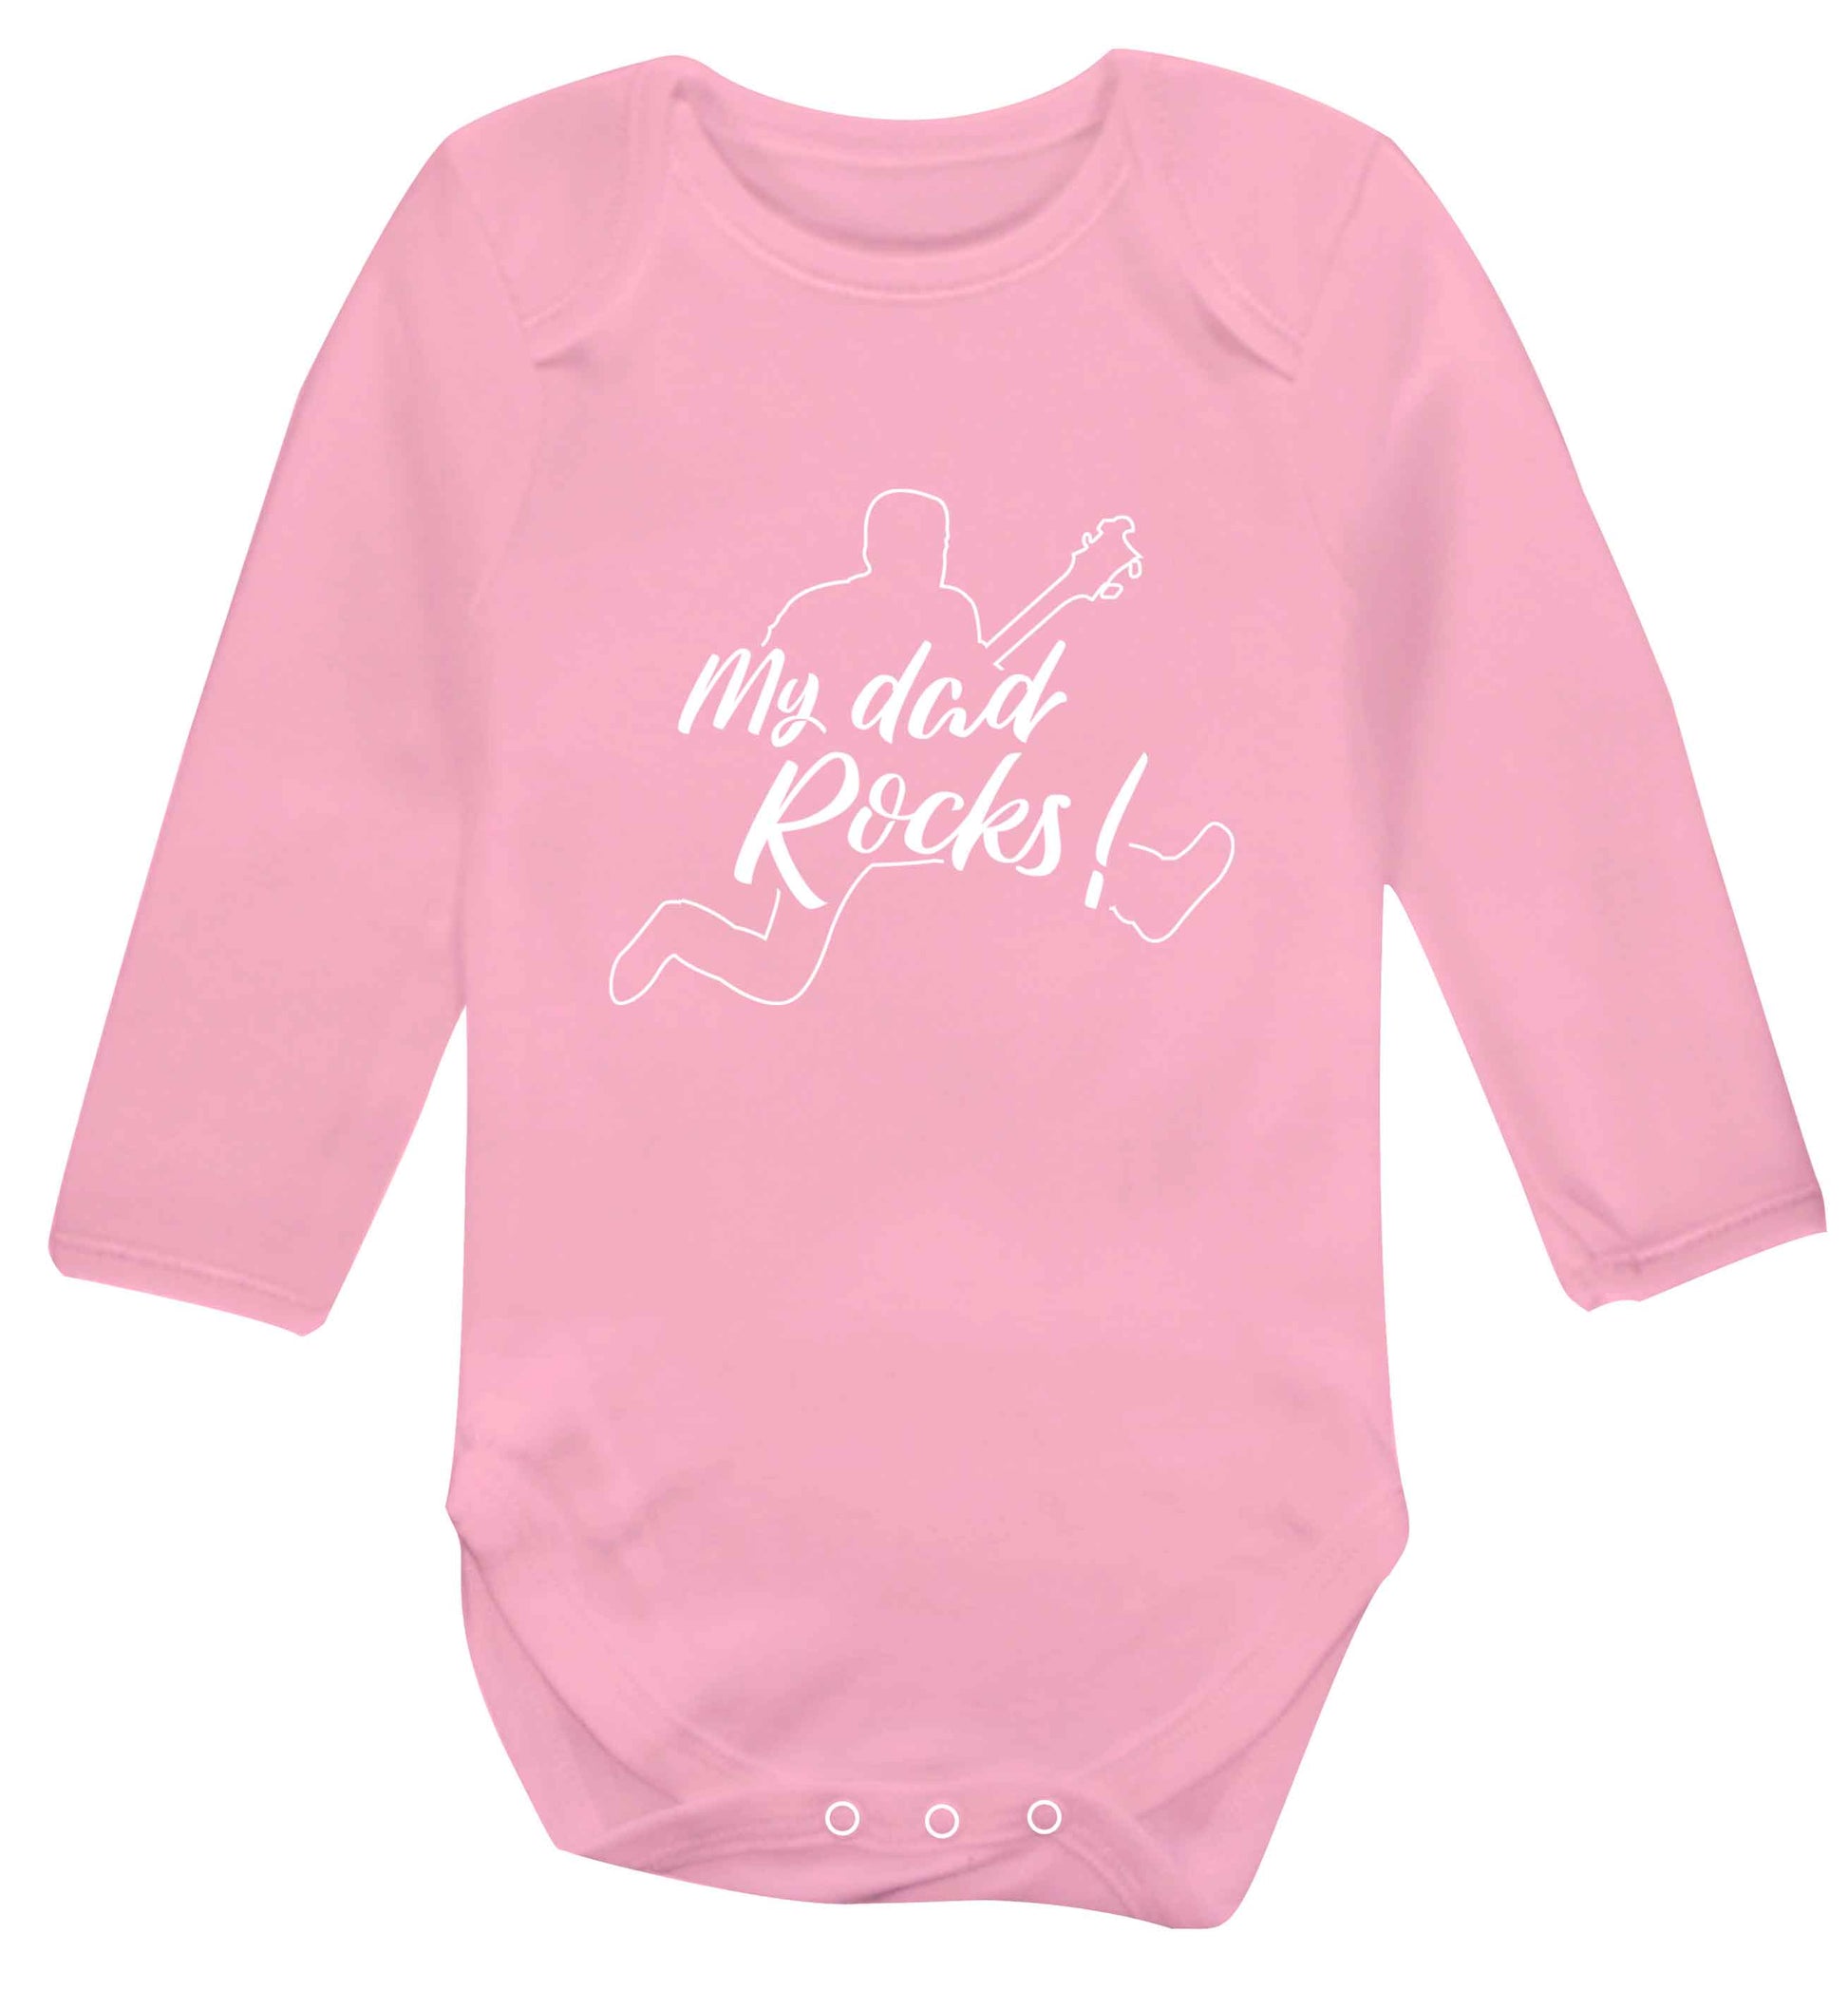 My Dad rocks baby vest long sleeved pale pink 6-12 months